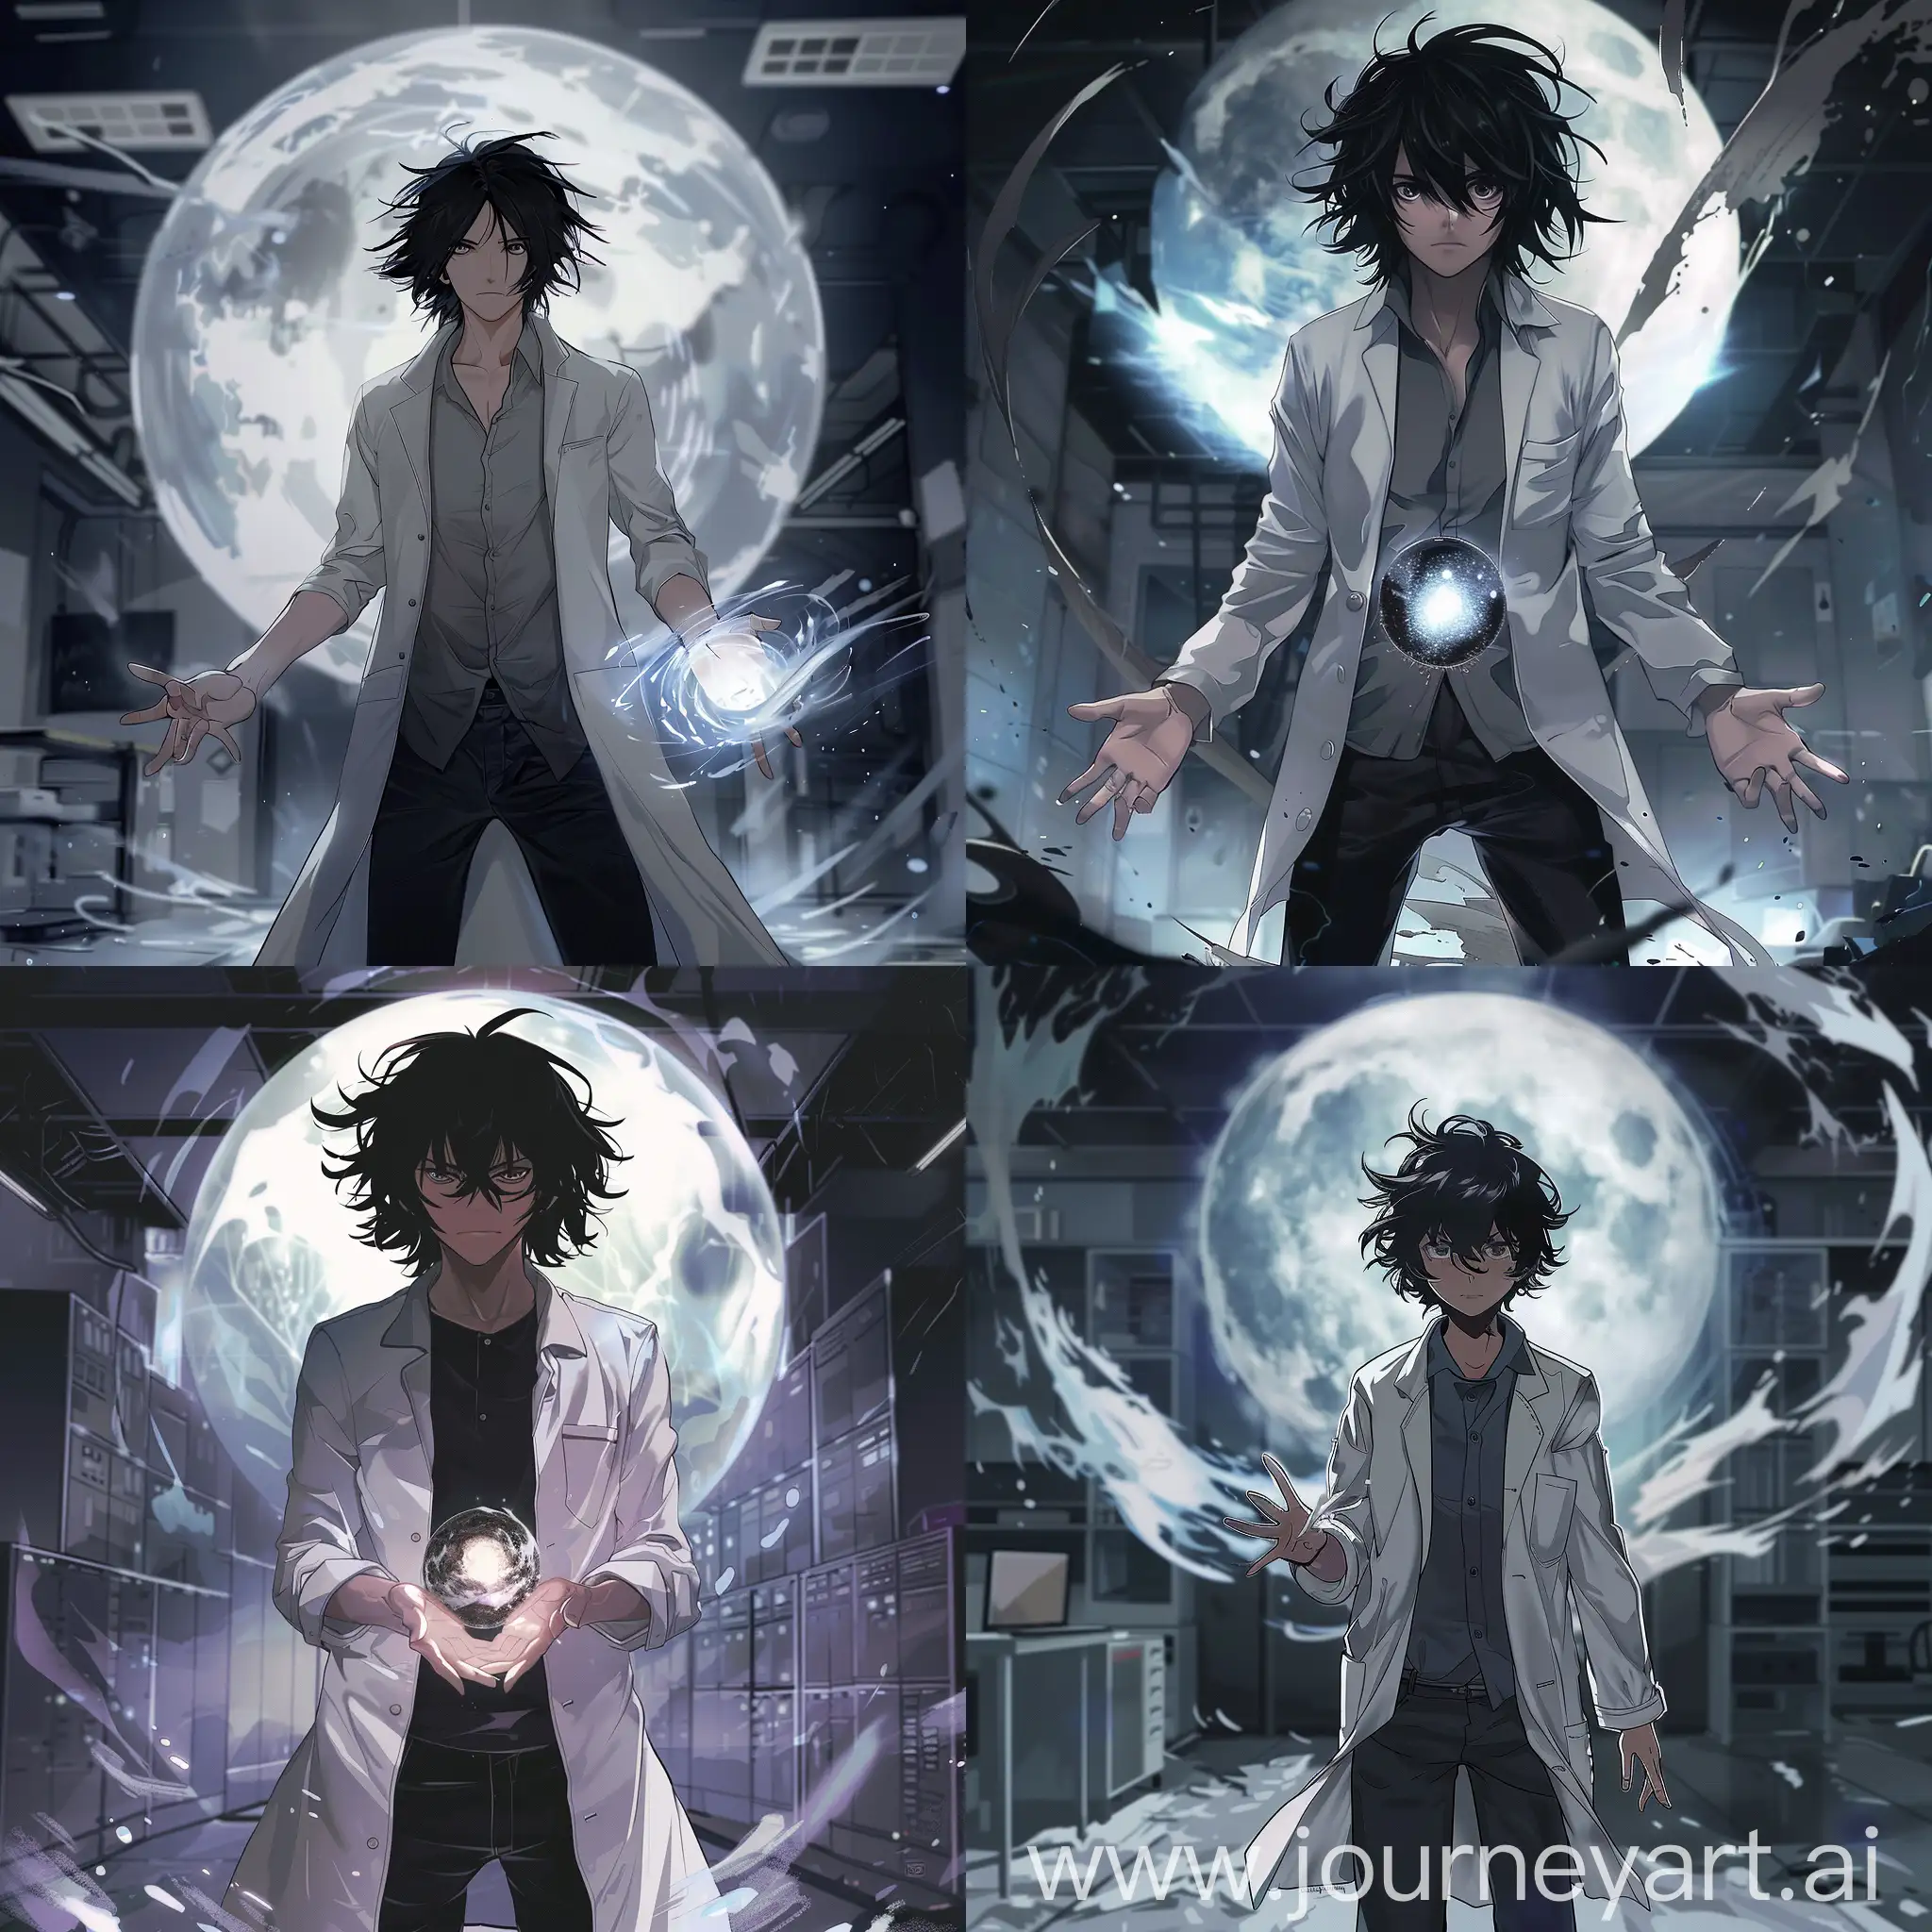 The guy is 20 years old, black disheveled shoulder-length hair with dark gray strands, dark gray eyes. He is dressed in a light gray shirt, black jeans and a white lab coat, hands in front of him, a ball of darkness between his hands. In the background is a large room, in the middle of which a large ball is flying, half consisting of light, half of darkness, with slightly blurred contours